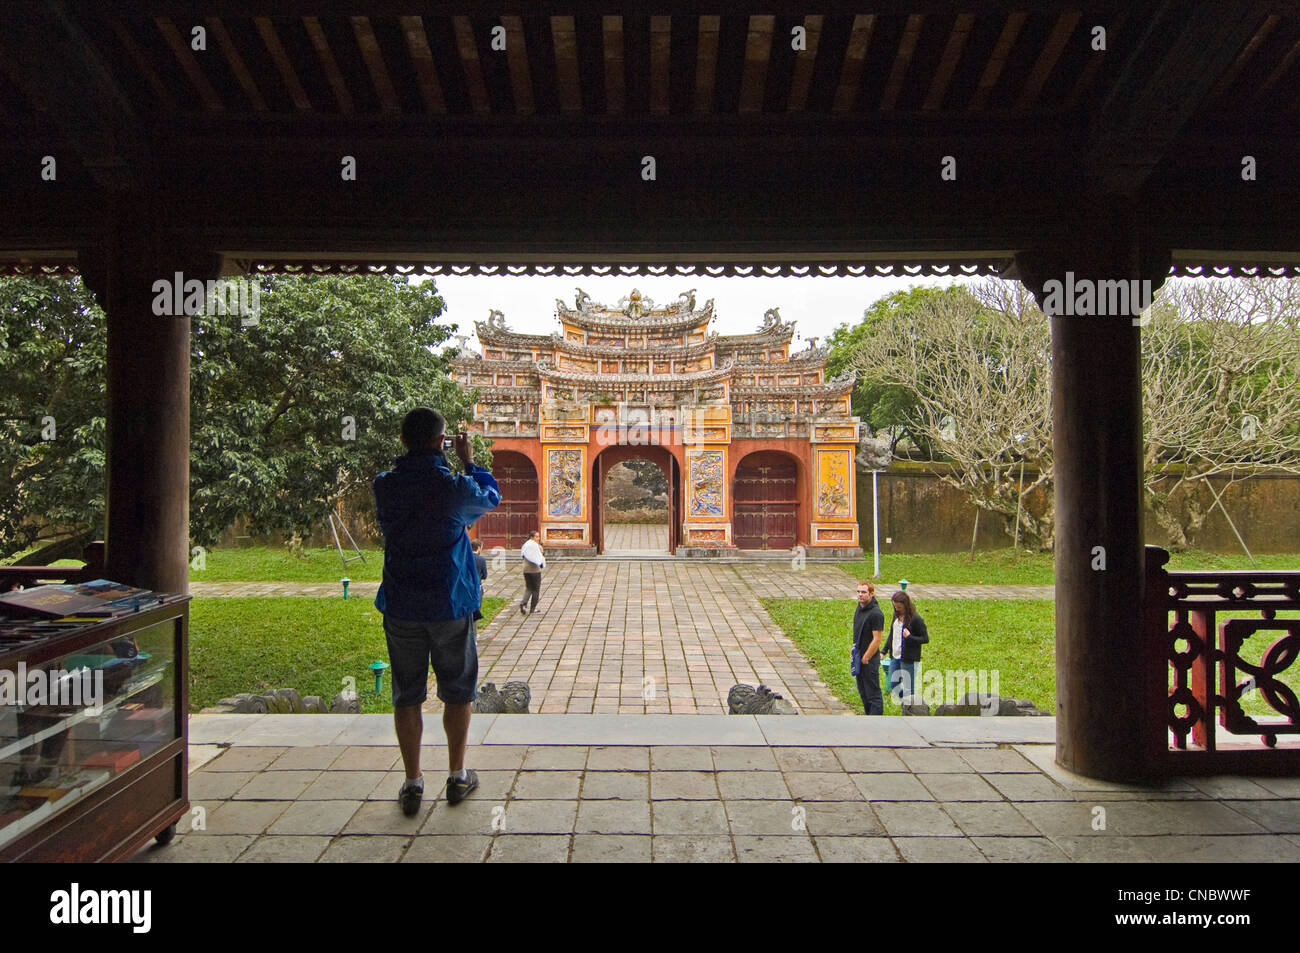 Horizontal view of Hien Lam Cac Pavilion, [Pavilion of Lasting Lucidity] a restored ornate gateway at Imperial Citadel in Hue, Vietnam Stock Photo